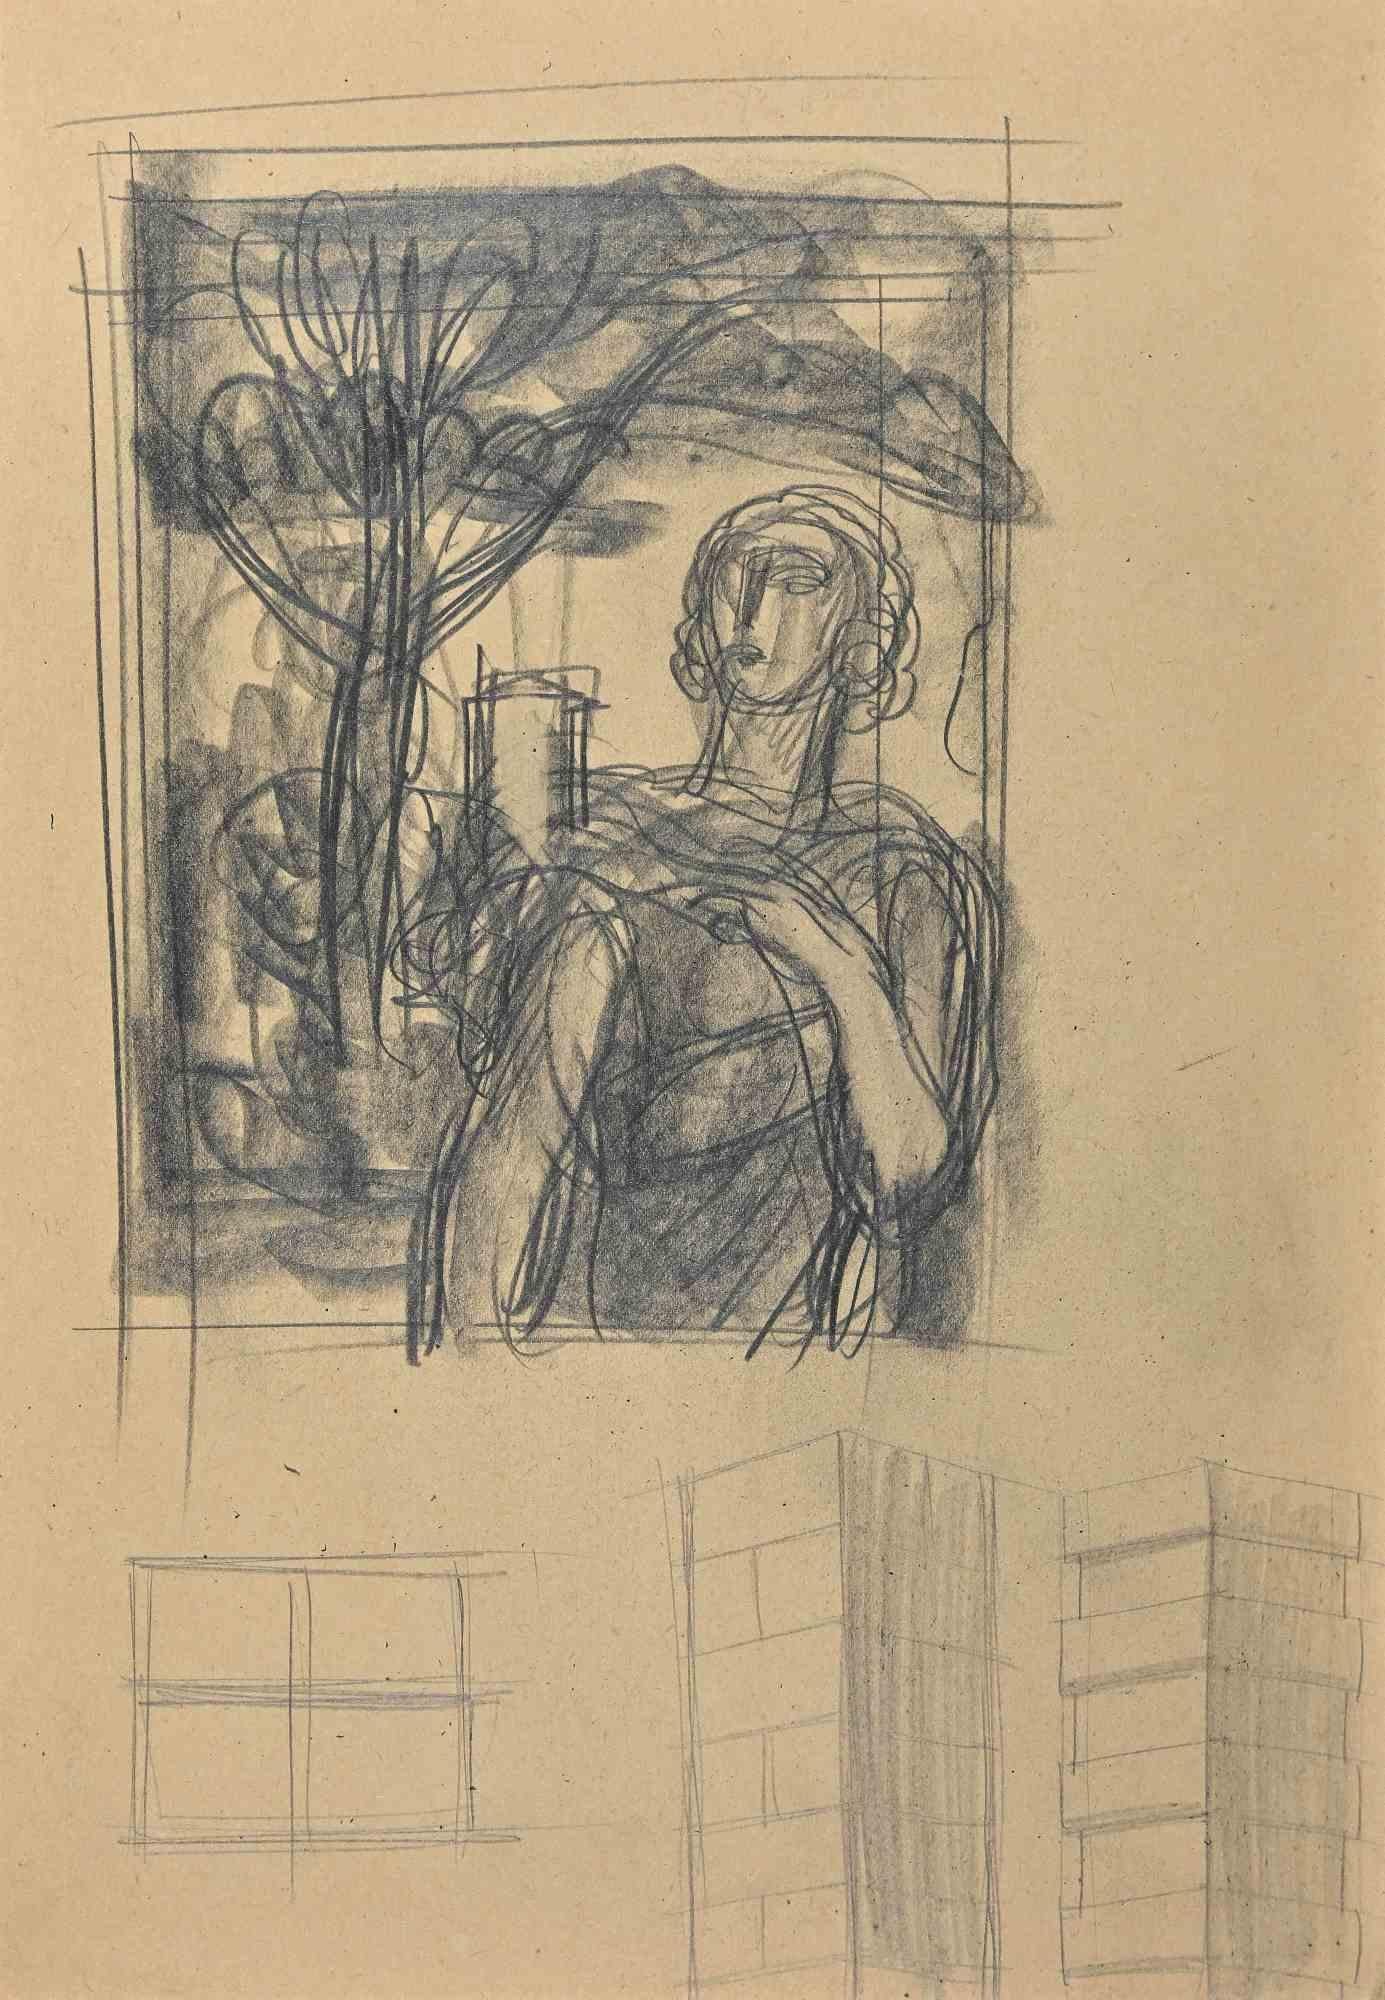 The Woman In A Garden is aDrawing in pencil on creamy-colored paper attributed to Gaspard Maillol in the mid-20th Century.

Good conditions.

The artwork has represented through deft and rapid strokes by mastery.